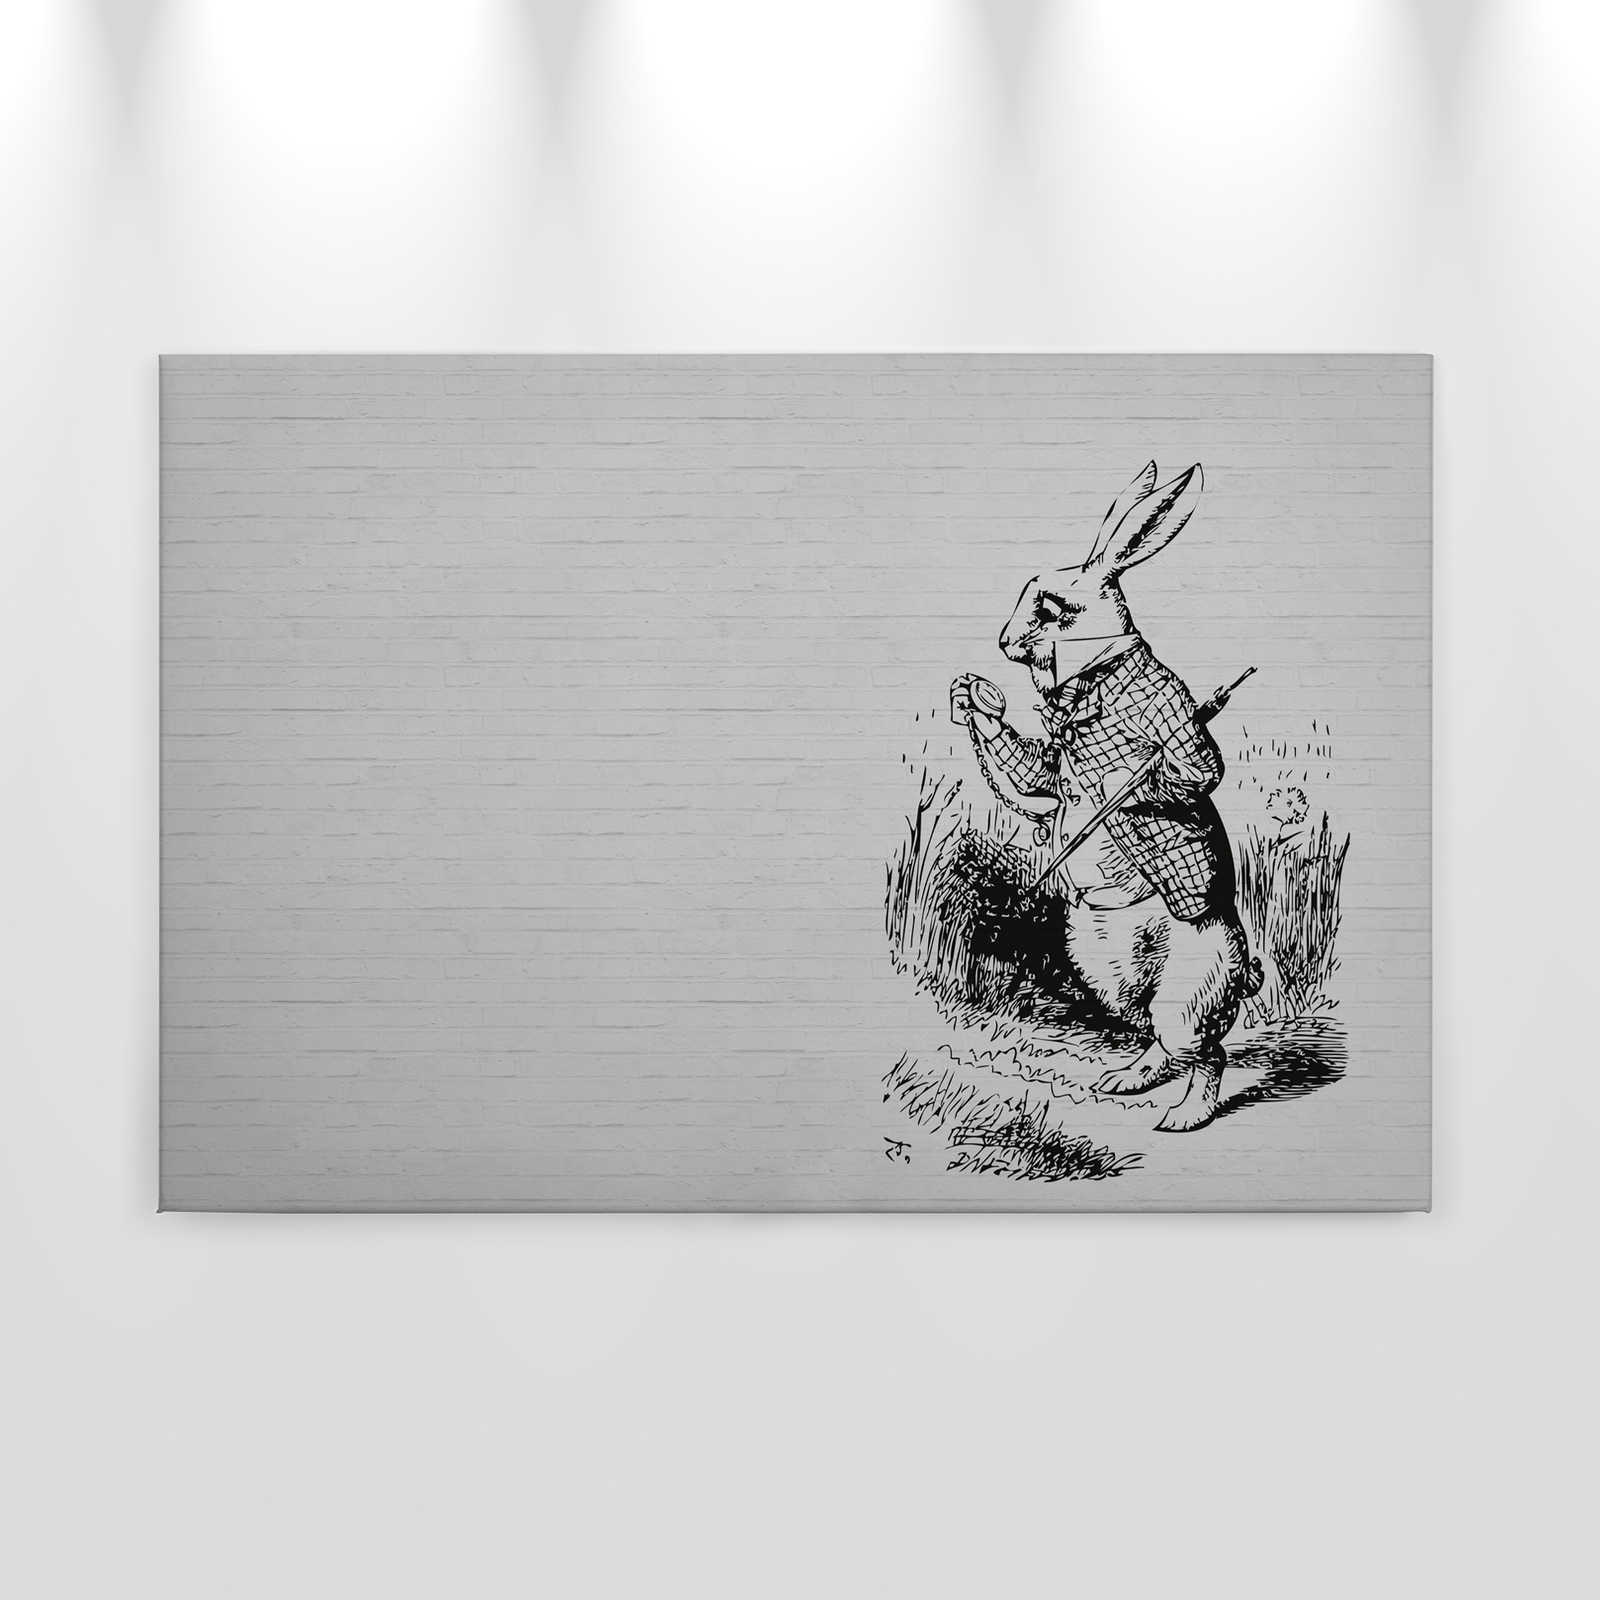             Black & White Canvas Painting Stone Look & Rabbit with Walking Stick - 0.90 m x 0.60 m
        